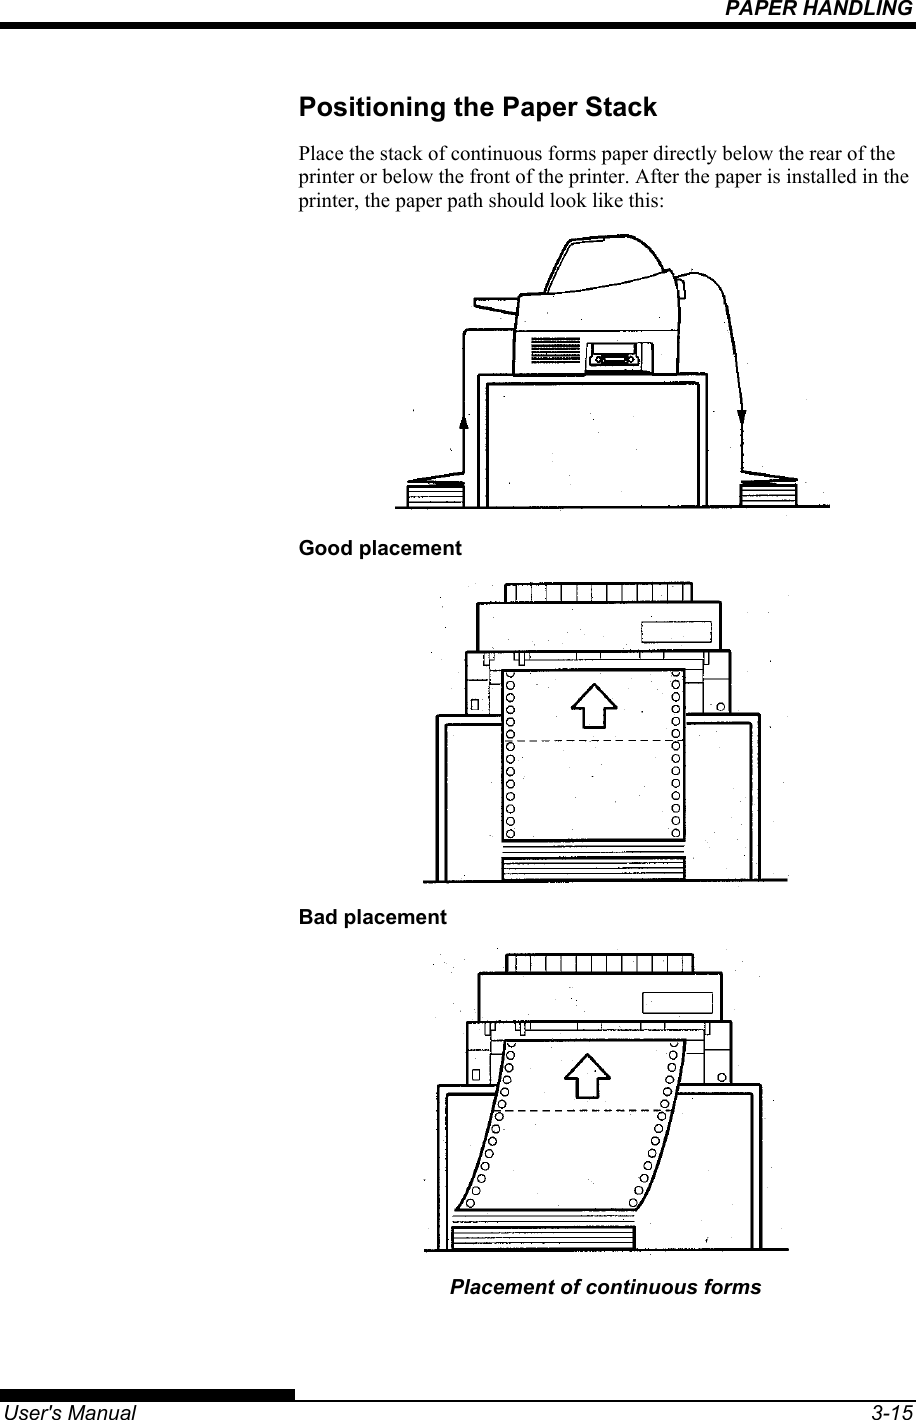 PAPER HANDLING   User&apos;s Manual  3-15 Positioning the Paper Stack Place the stack of continuous forms paper directly below the rear of the printer or below the front of the printer. After the paper is installed in the printer, the paper path should look like this:  Good placement  Bad placement  Placement of continuous forms 